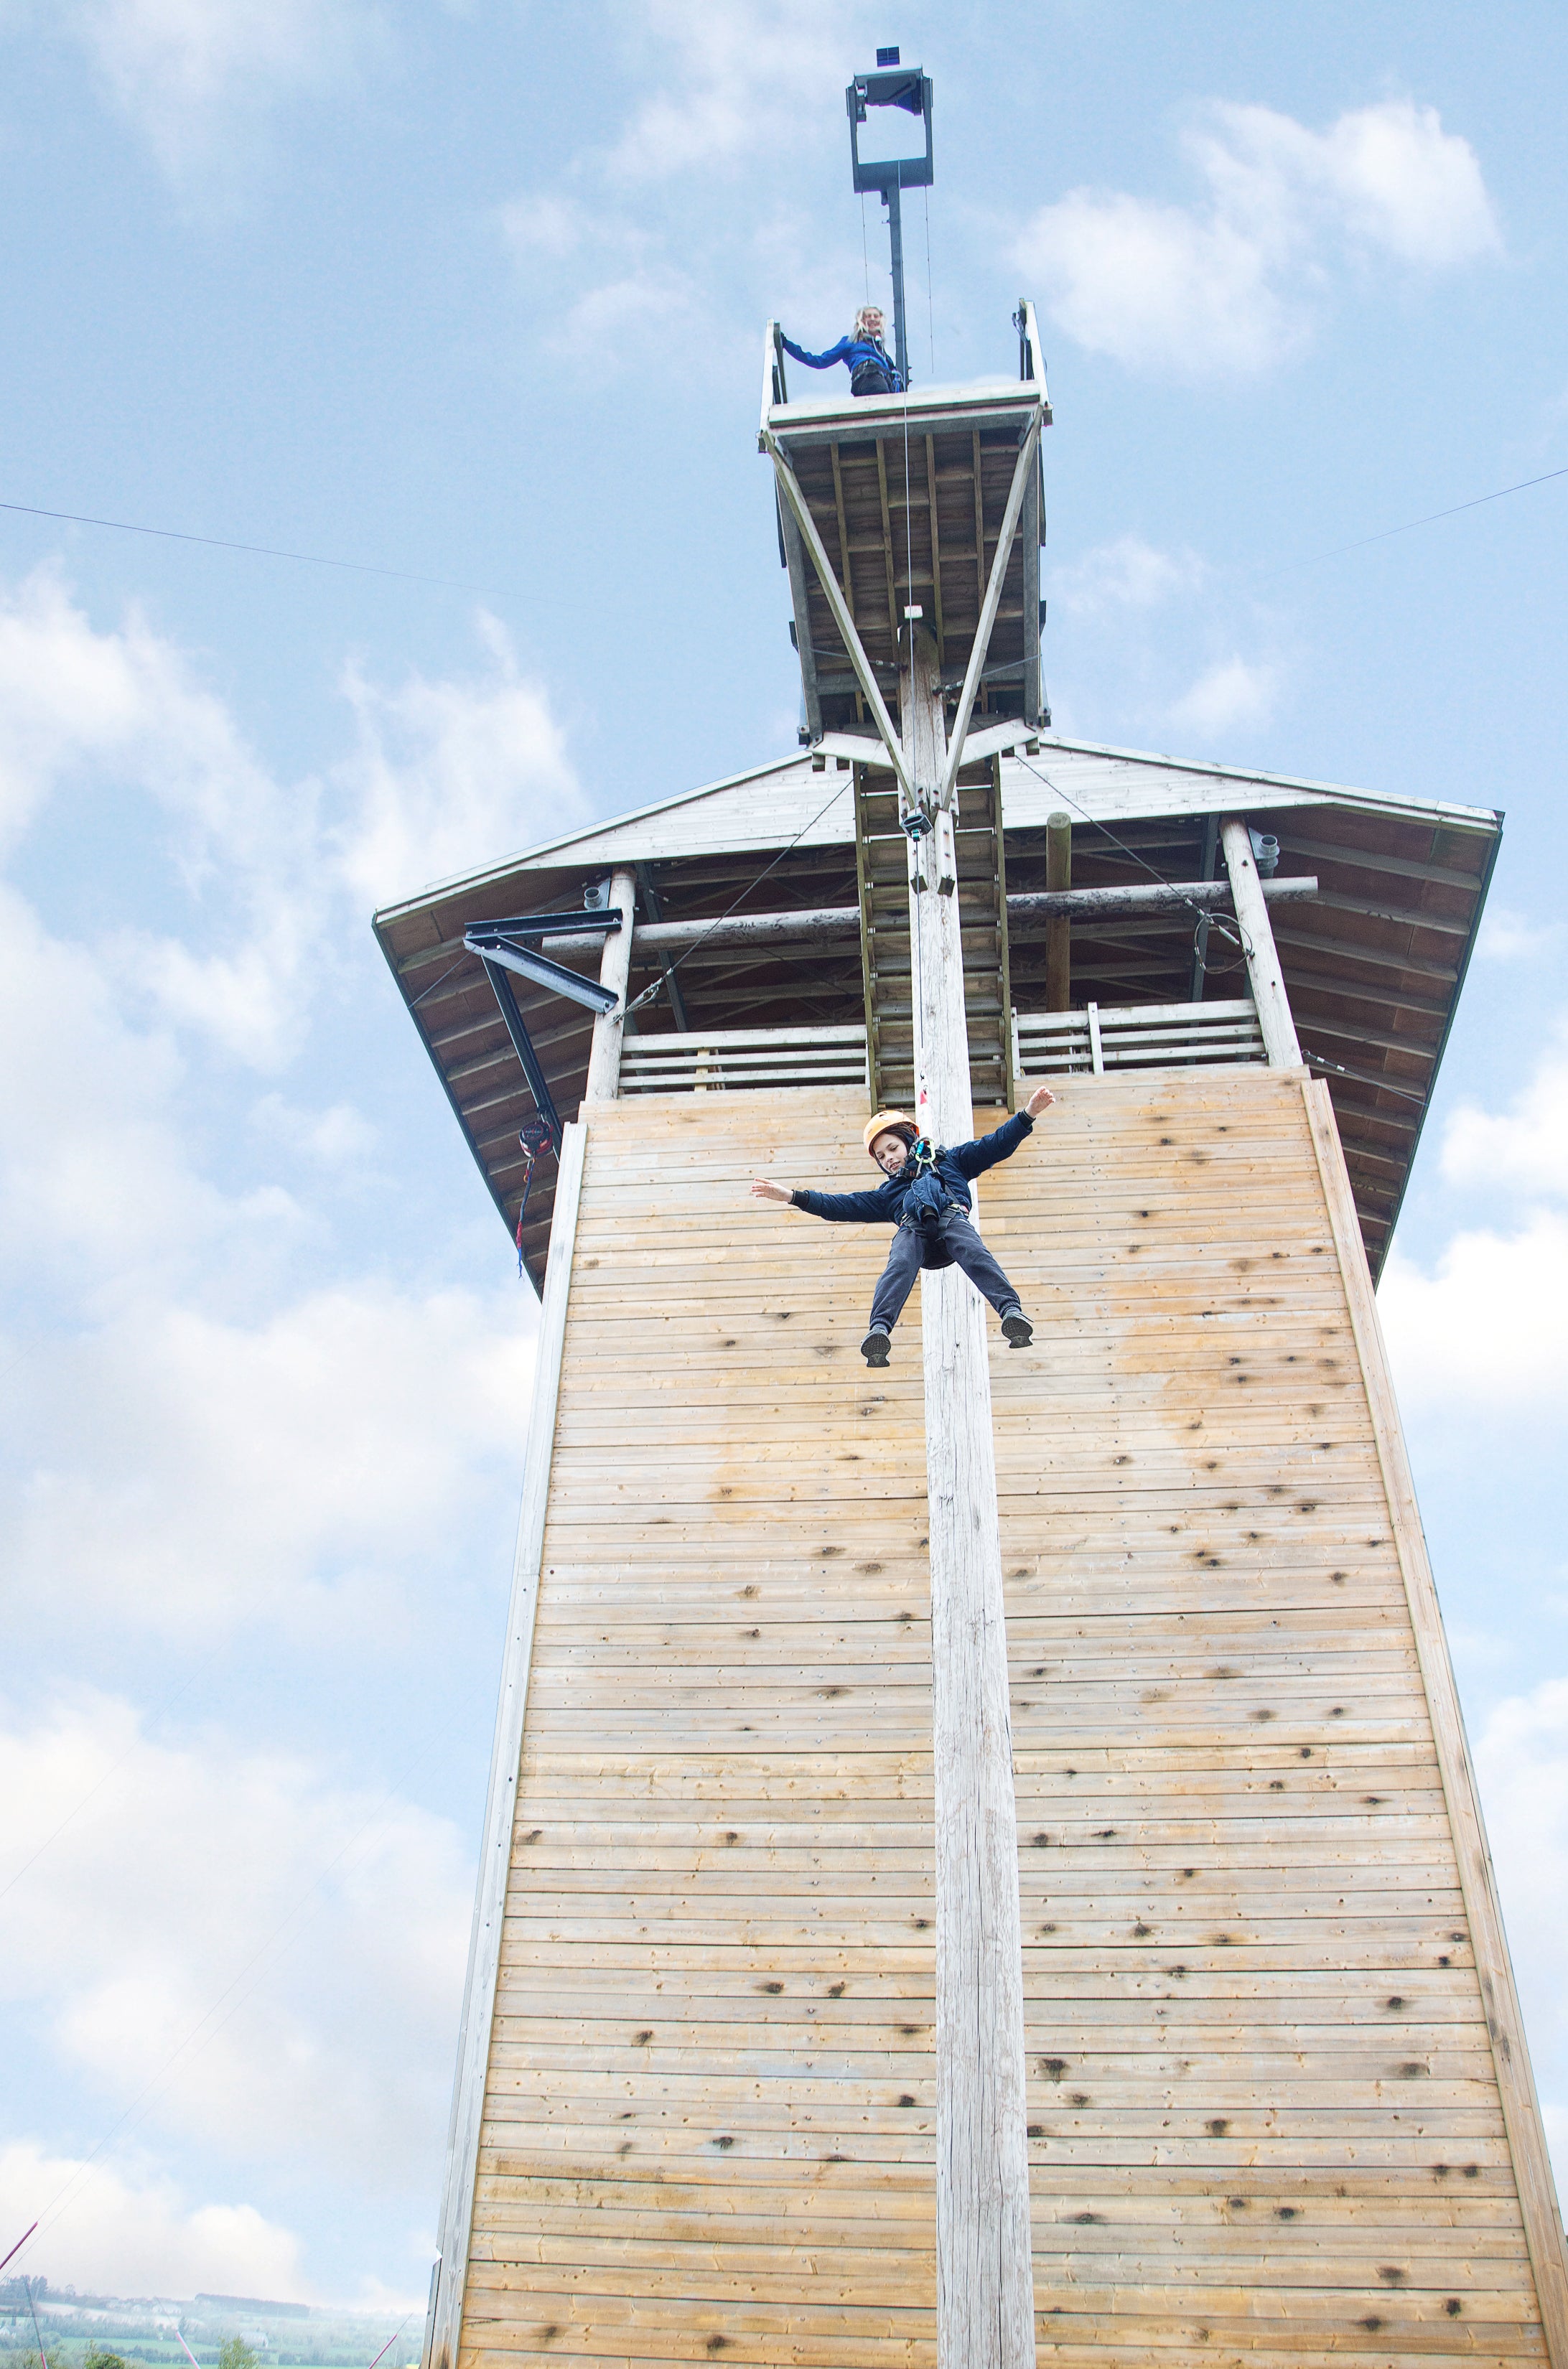 A boy descending by wire from a high climbing wall